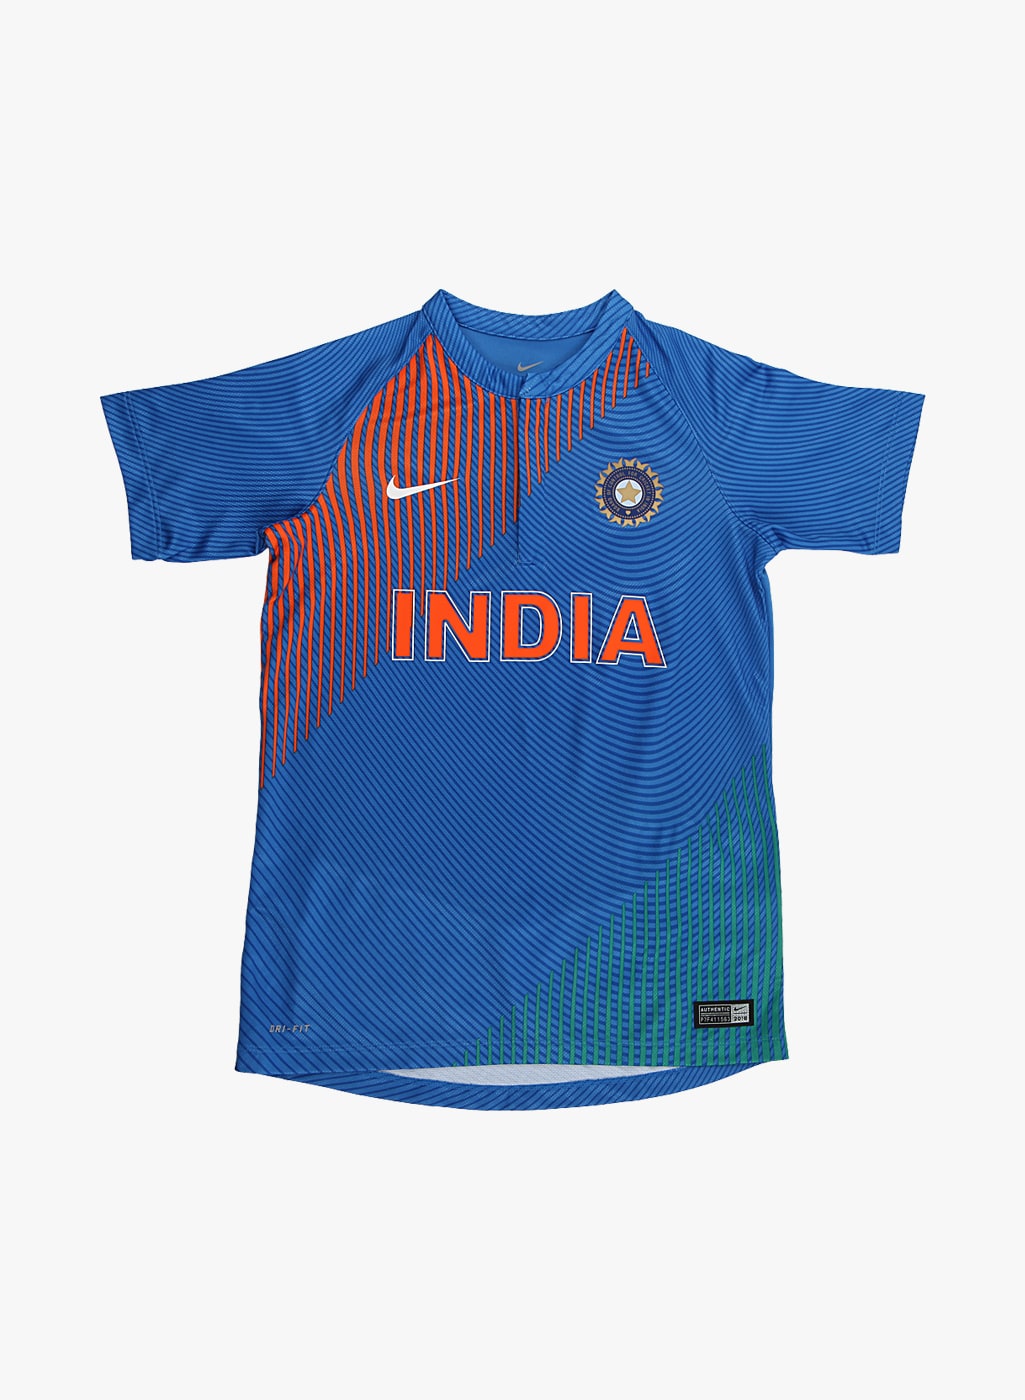 india jersey online nike